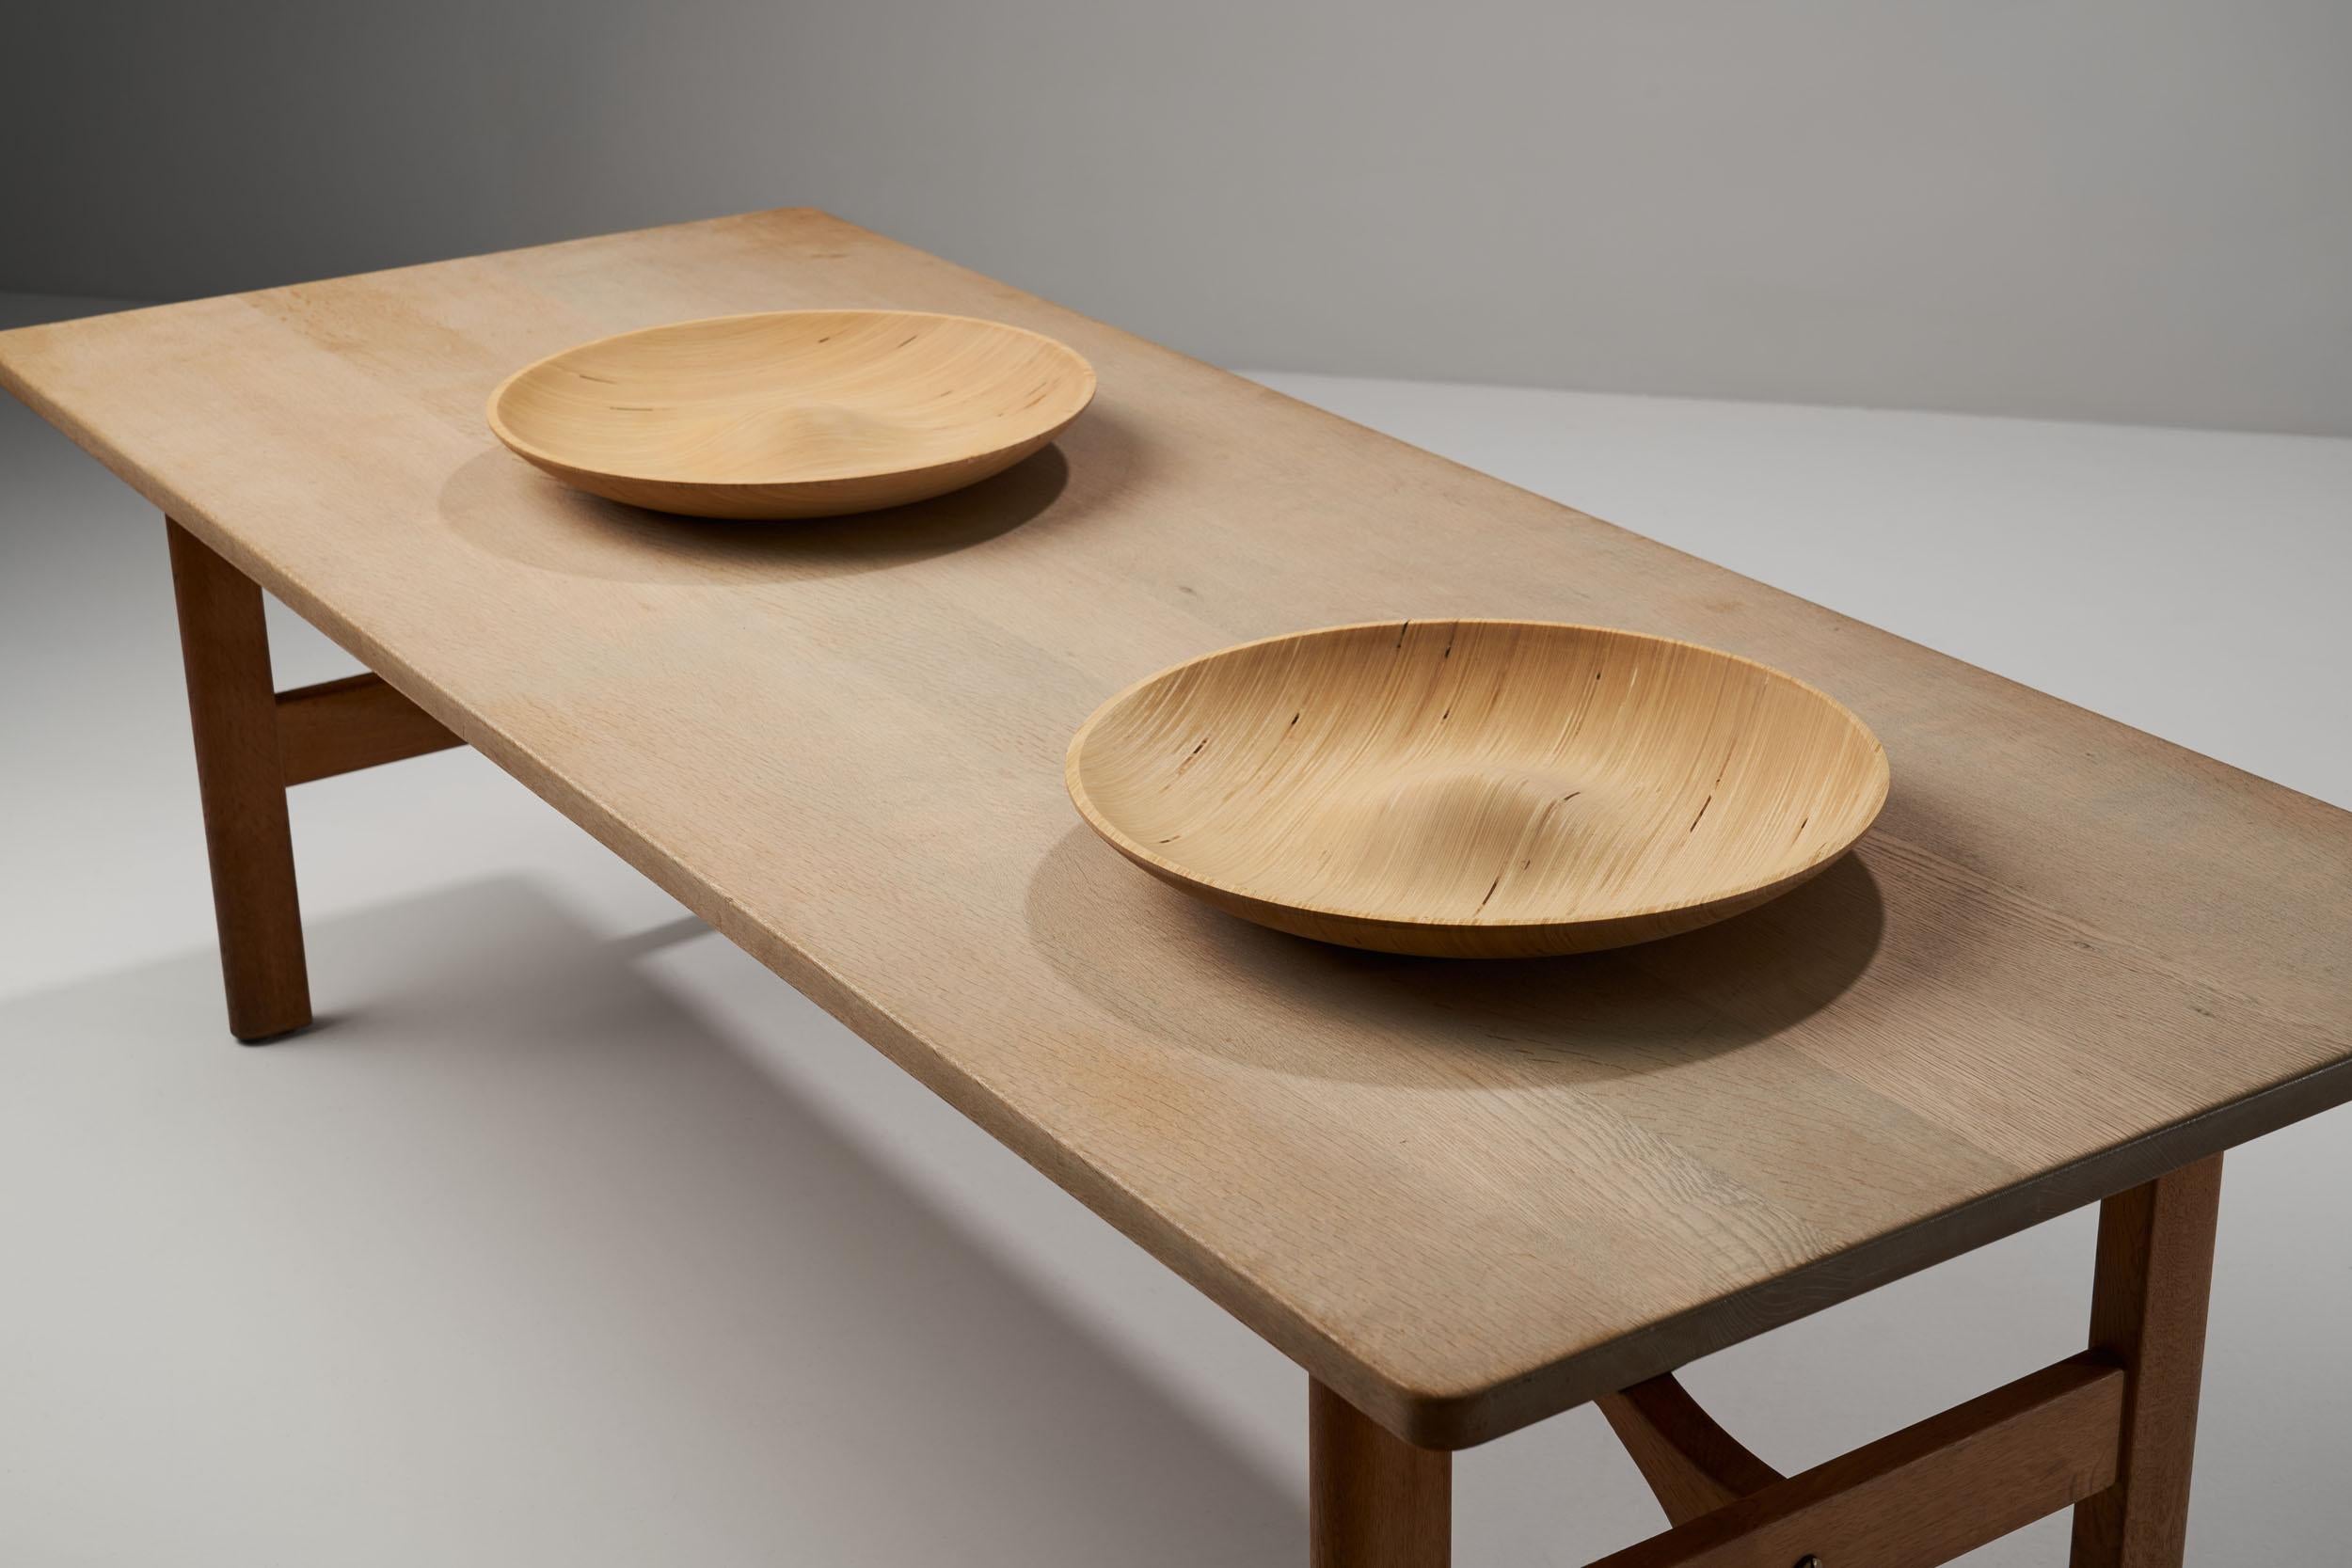 Carved Wooden Plates by Antti Nurmesniemi, Finland, circa 1980s